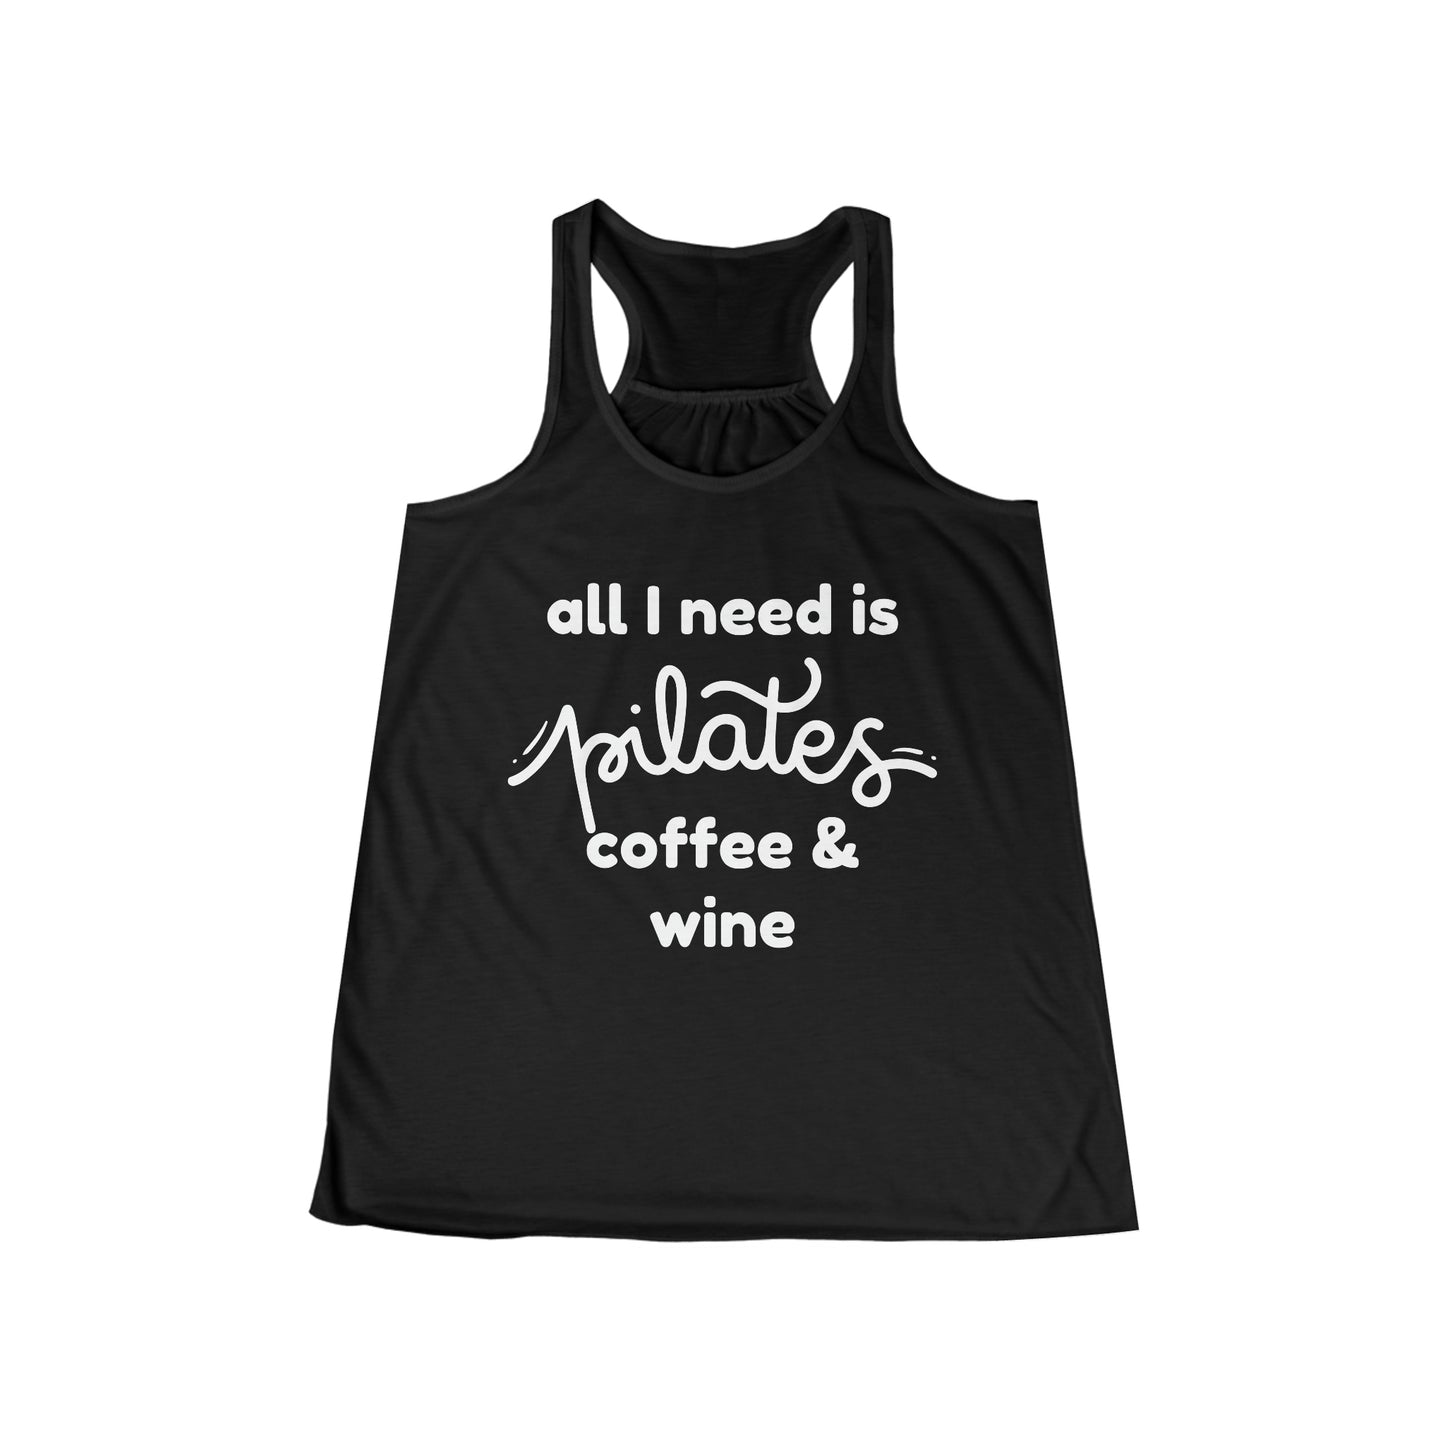 All I Need Is Pilates, Coffee And Wine Tank Top